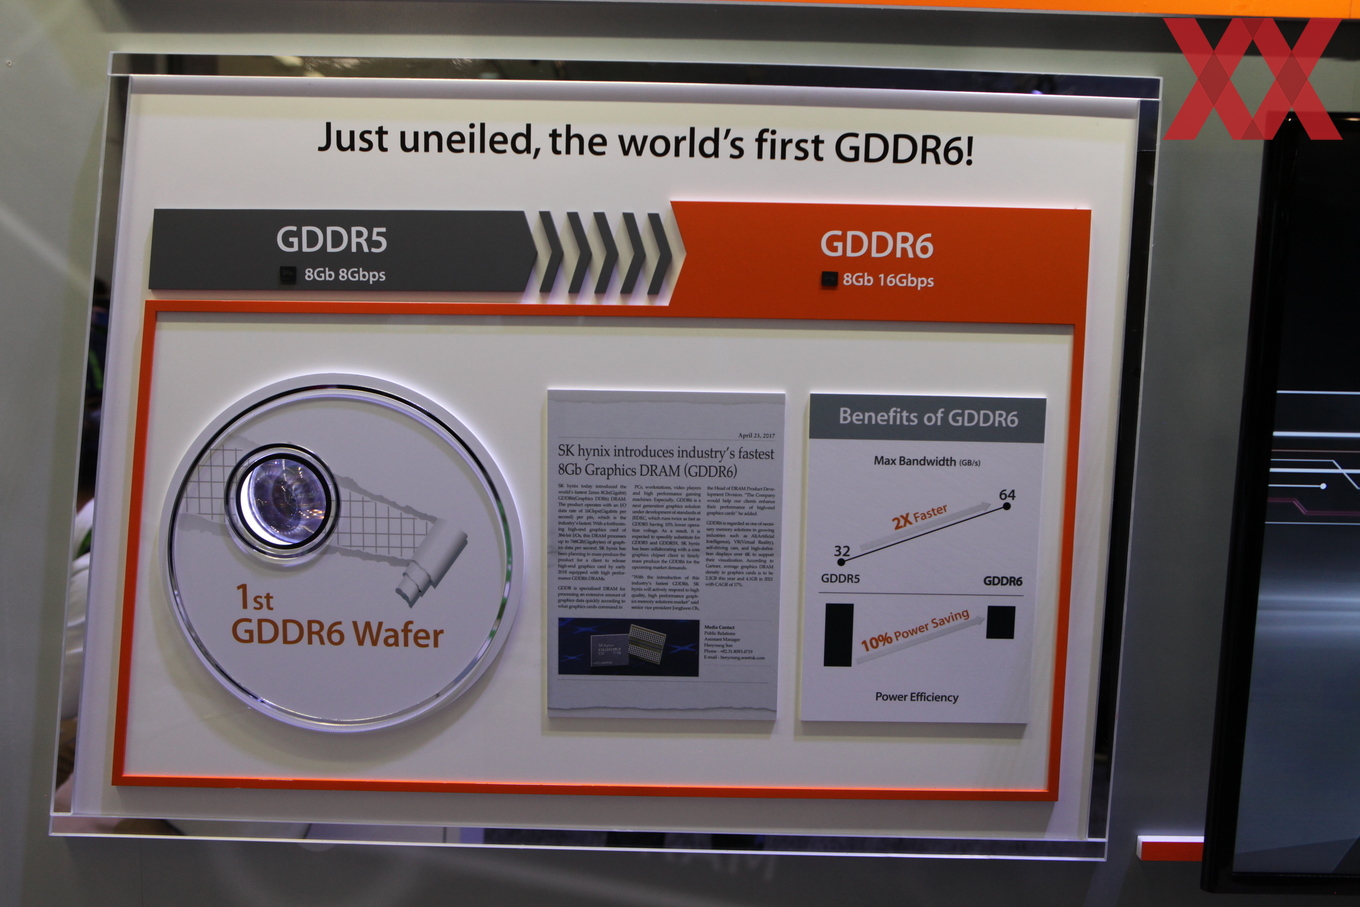 Media asset in full size related to 3dfxzone.it news item entitled as follows: Alla GTC 2017 SK Hynix mostra il primo wafer di memoria video GDDR6 | Image Name: news26306_SK Hynix-GDDR6-GTC-2017_2.jpg